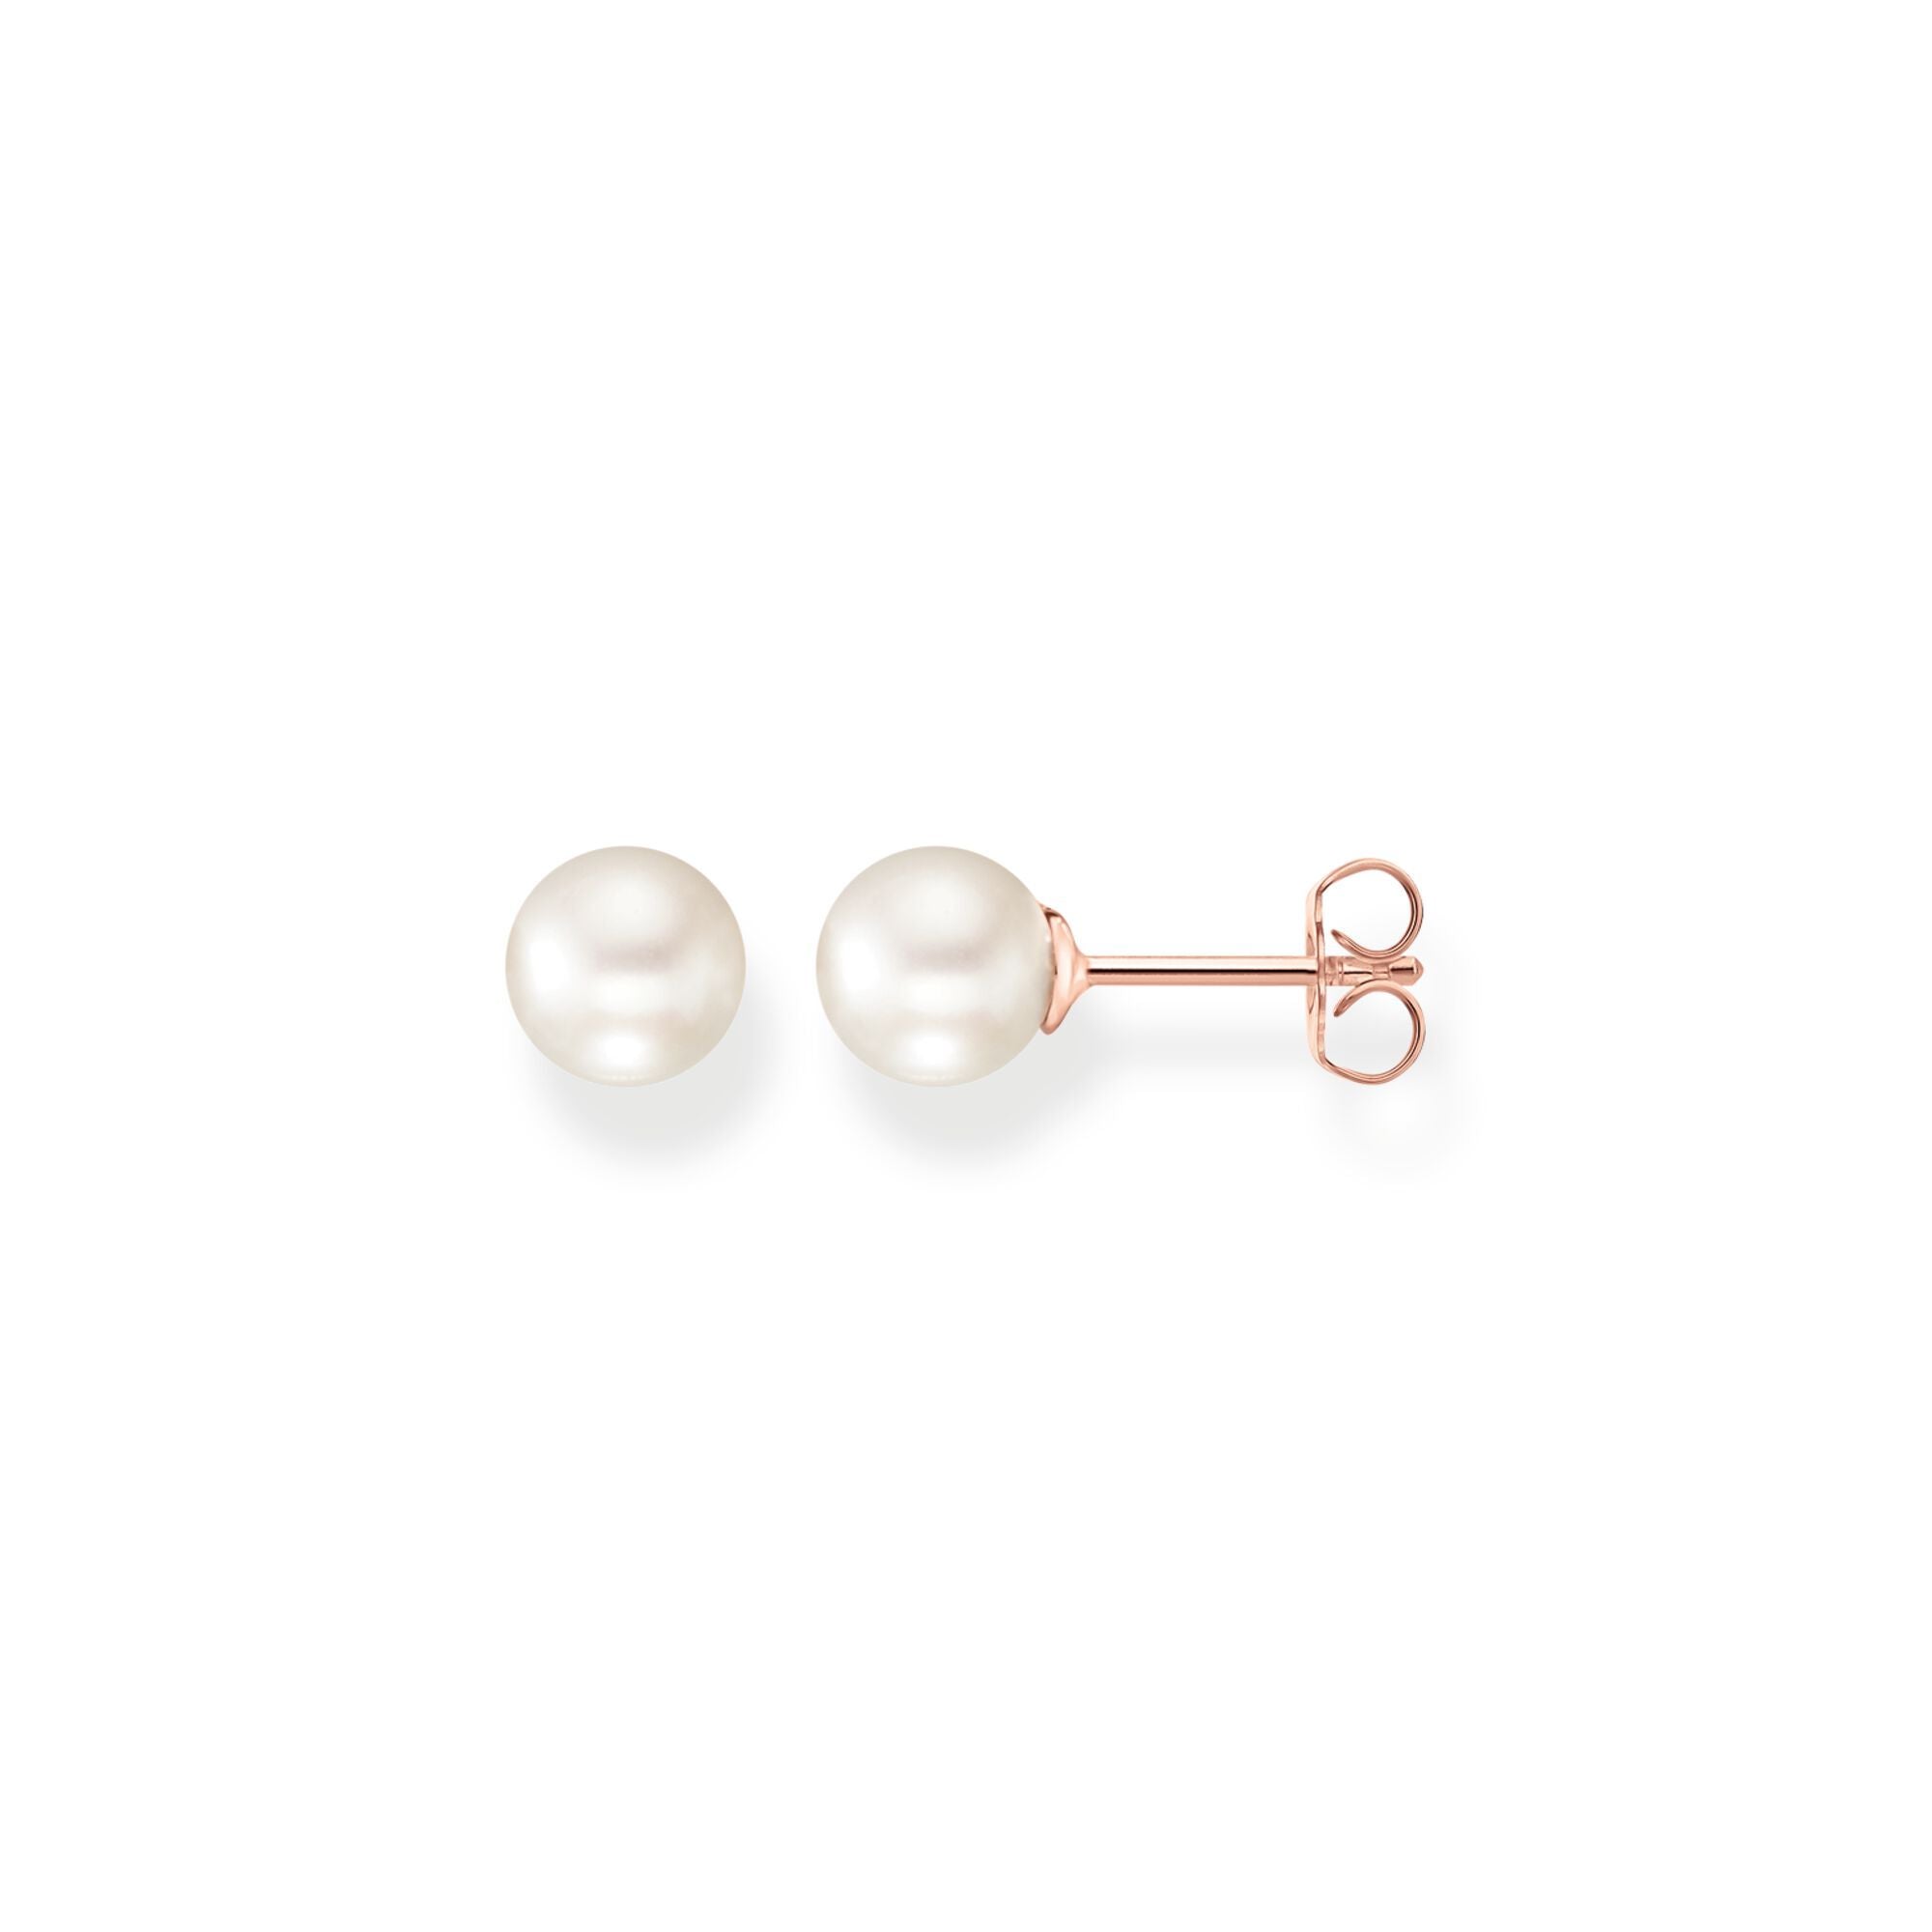 Thomas Sabo Rose Gold Plated Sterling Silver Freshwater Pearl Stud Earrings